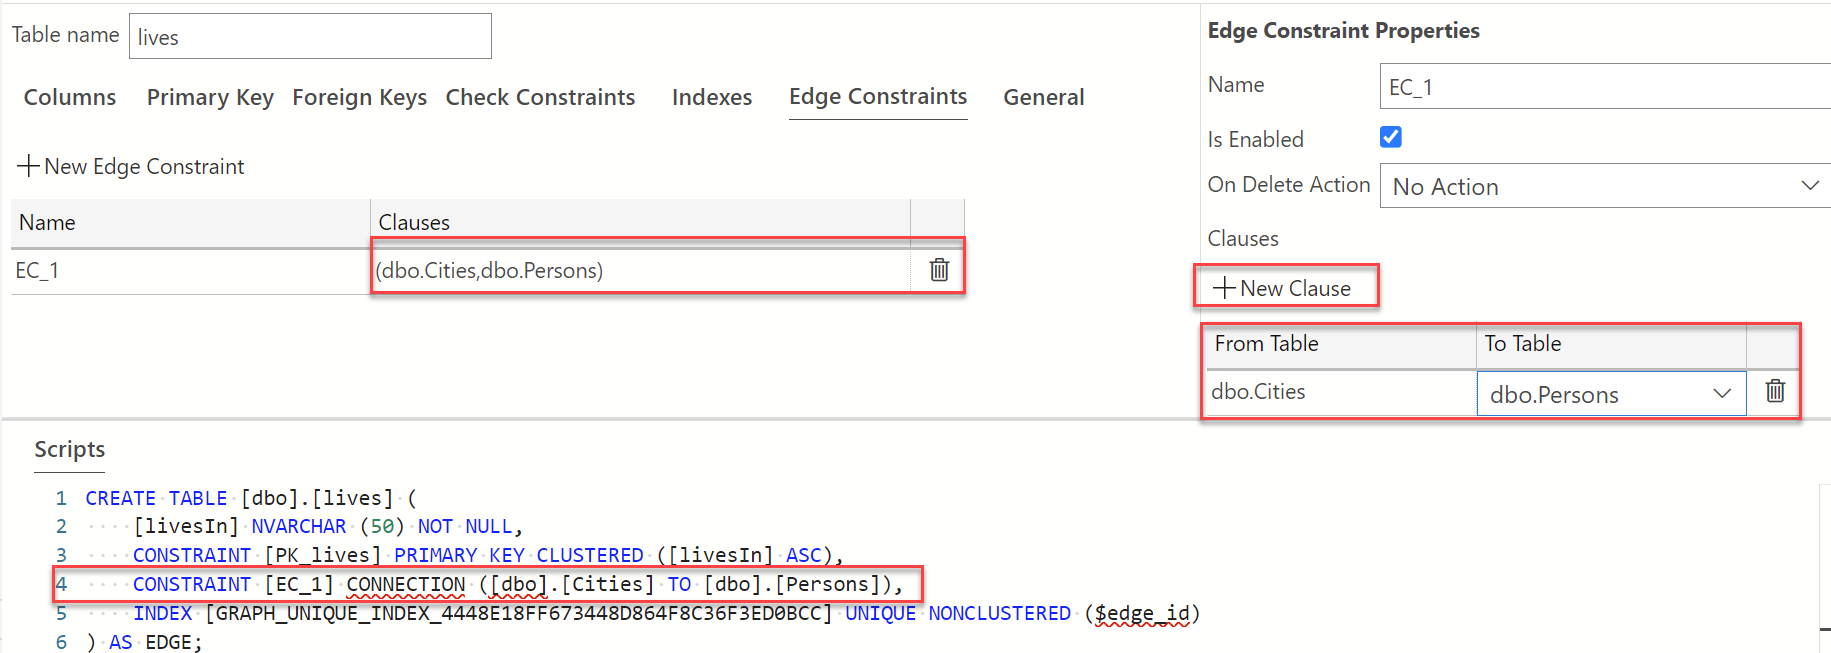 Screenshot of Table Designer showing how to add clause to edge constraint.